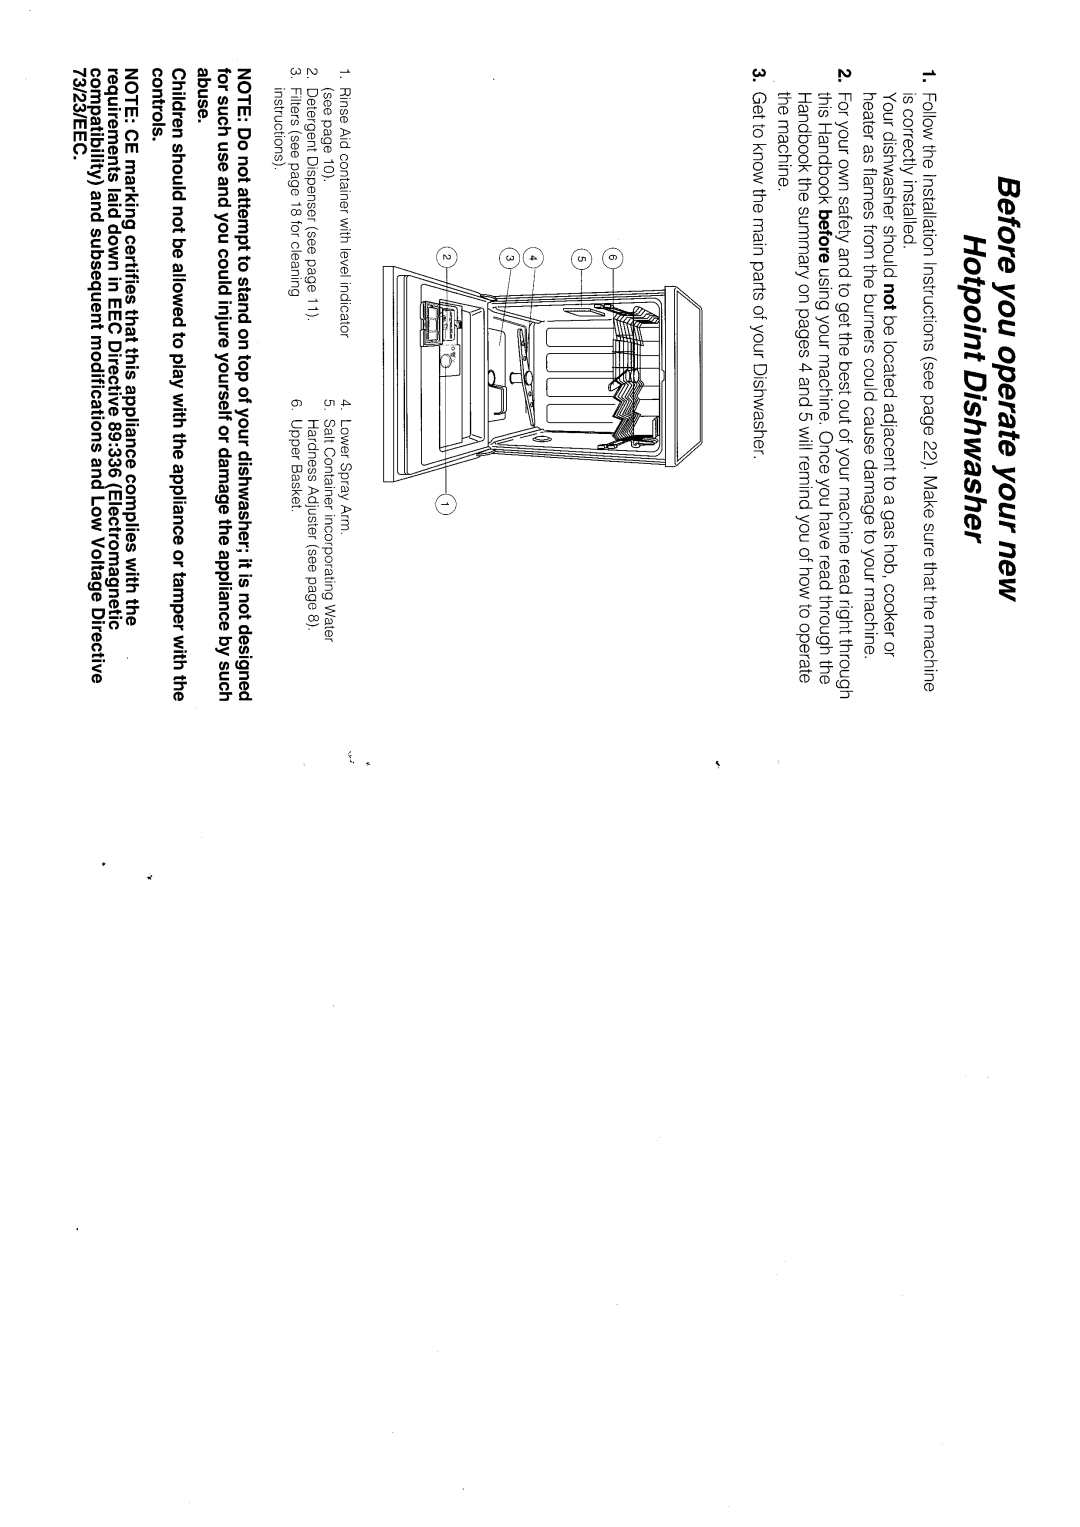 Hotpoint DC23/24 manual 